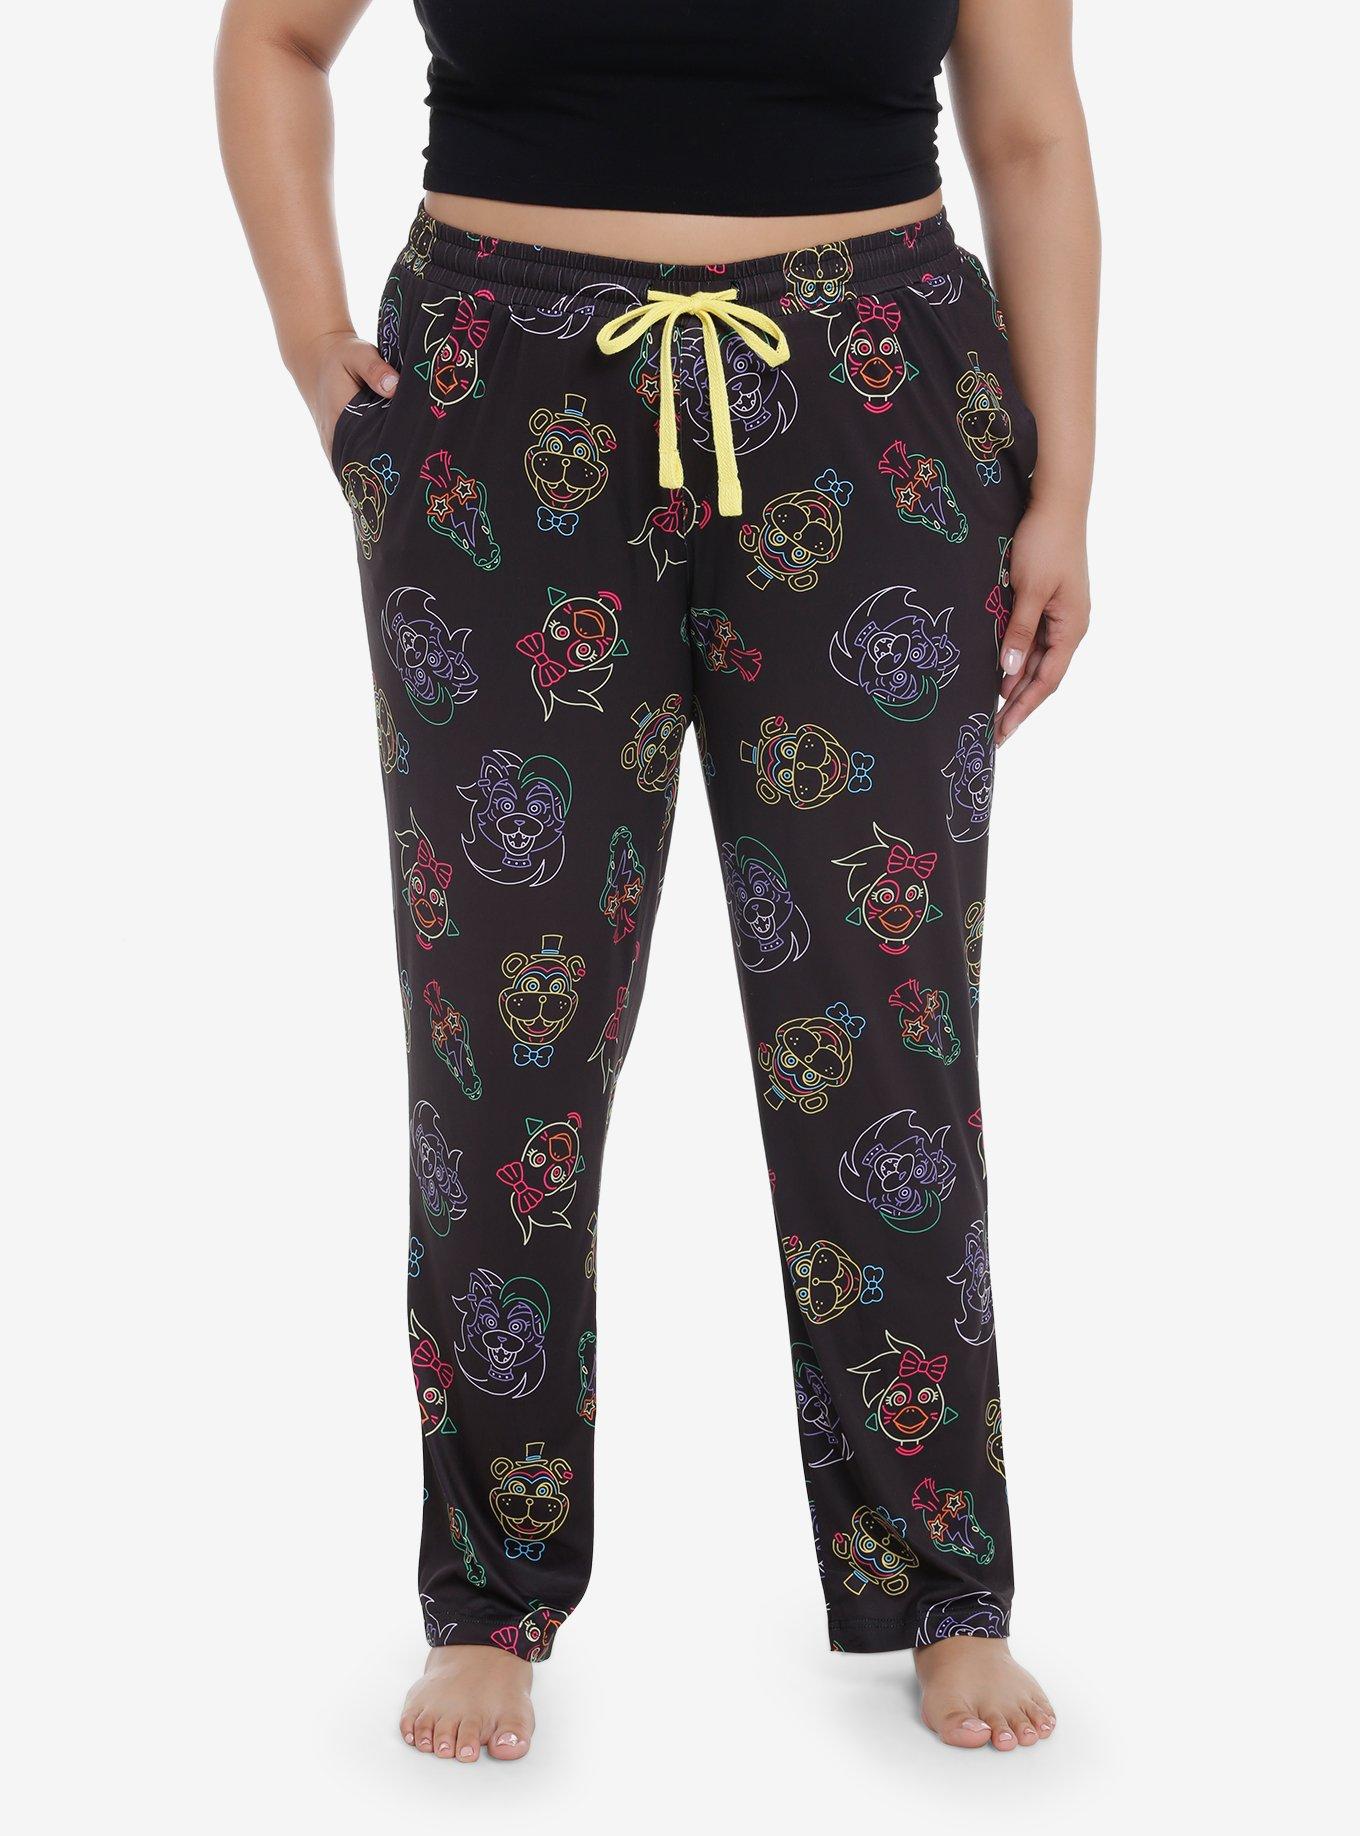 Five Nights At Freddy's Neon Characters Girls Pajama Pants Plus Size, BLACK, hi-res